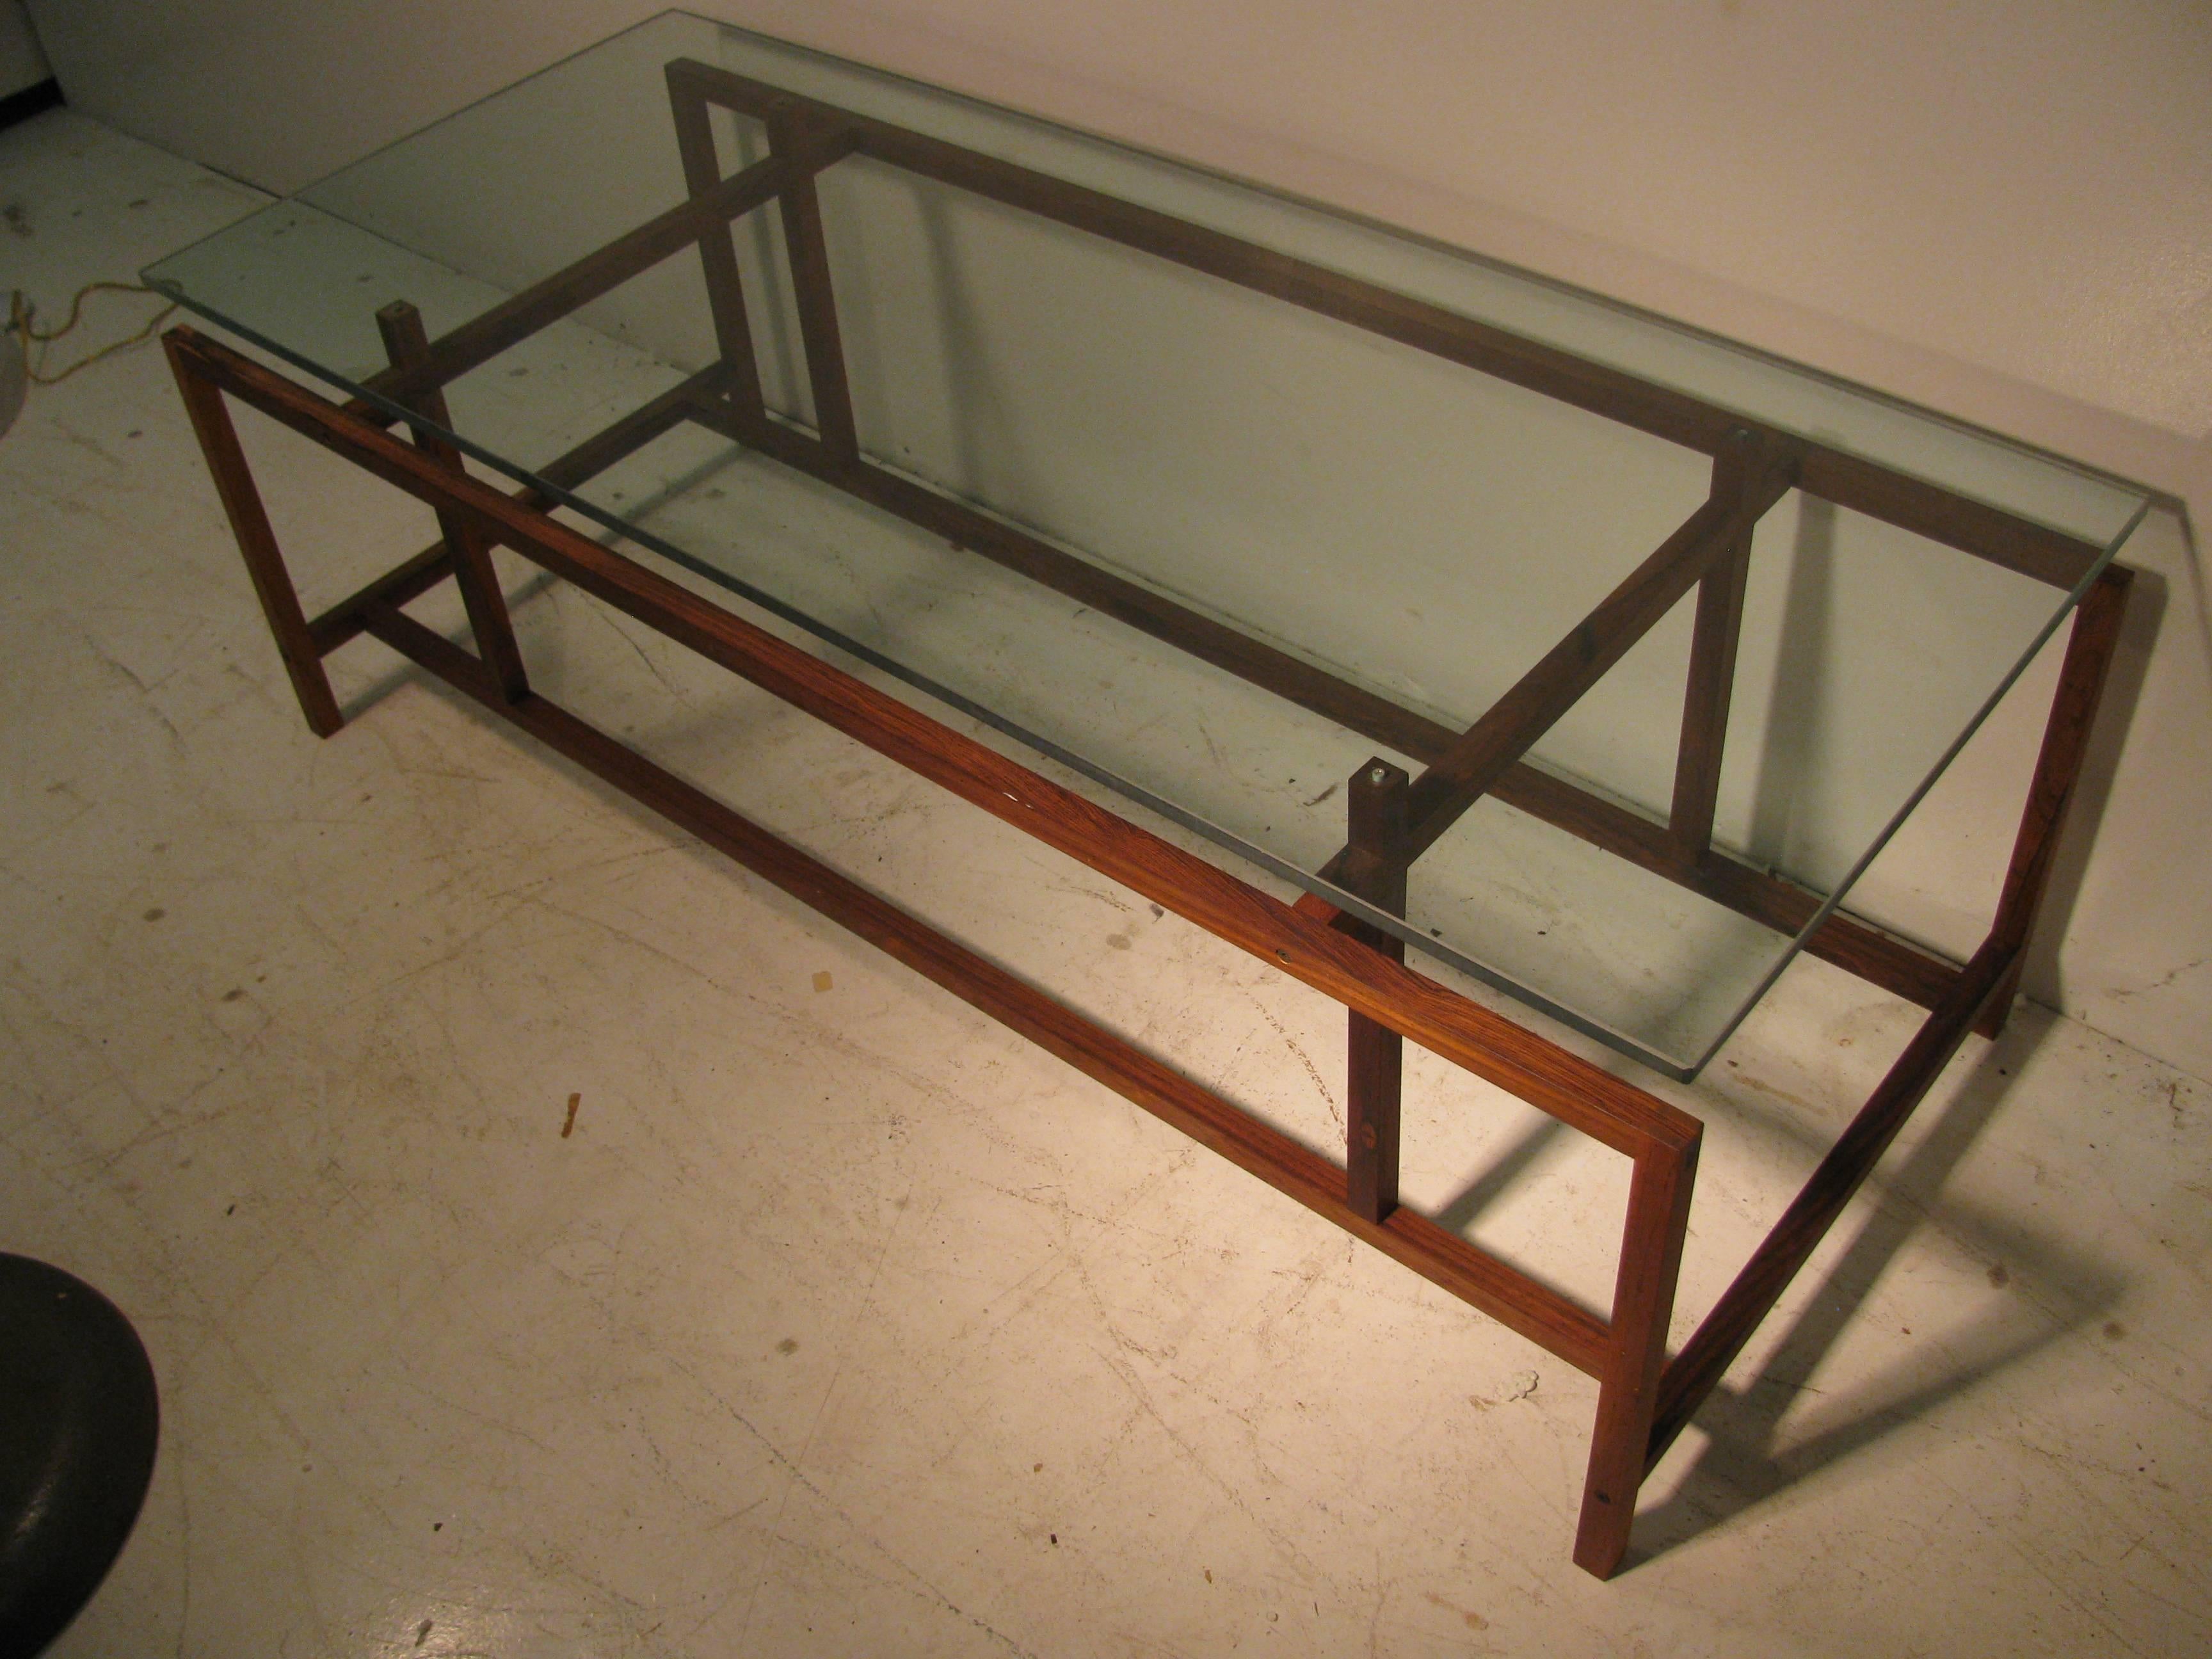 Simple and elegant. Architectural form with glass cantilevered over rosewood frame. Glass fits into wood pins to secure glass to the frame. All inquiries please call or just press “Contact Dealer” button.